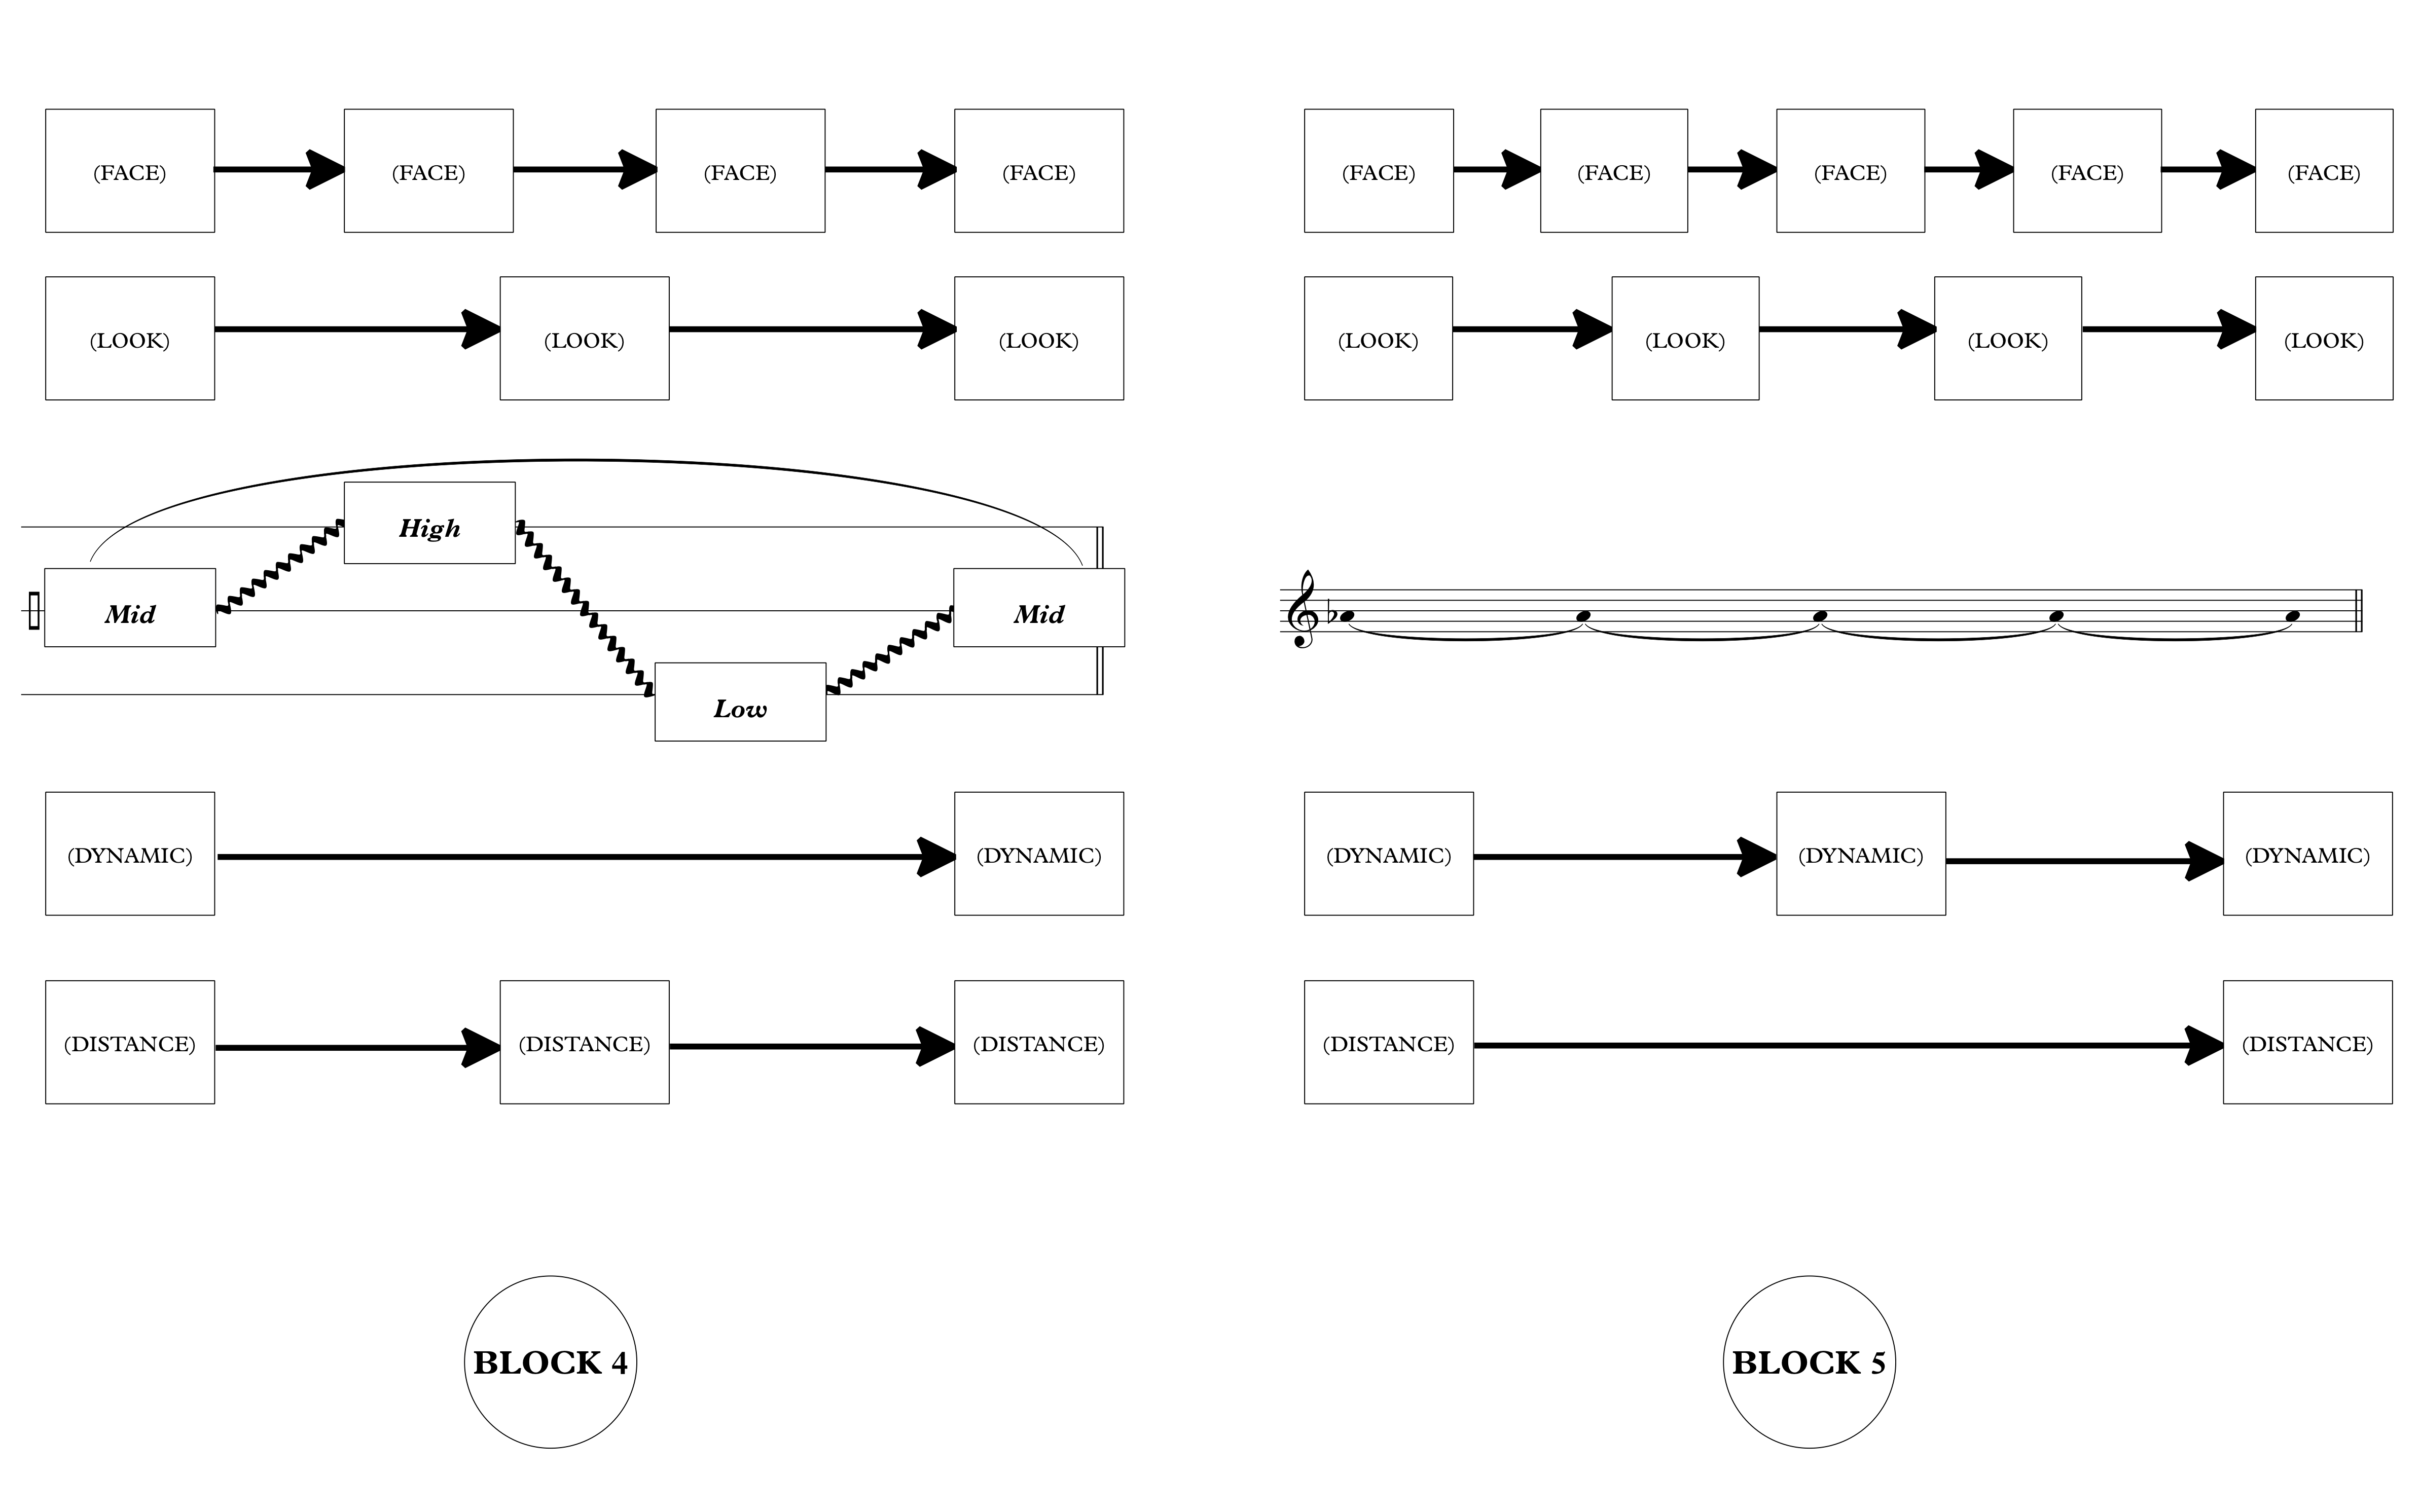 Extract of the score for offset iii showing directions